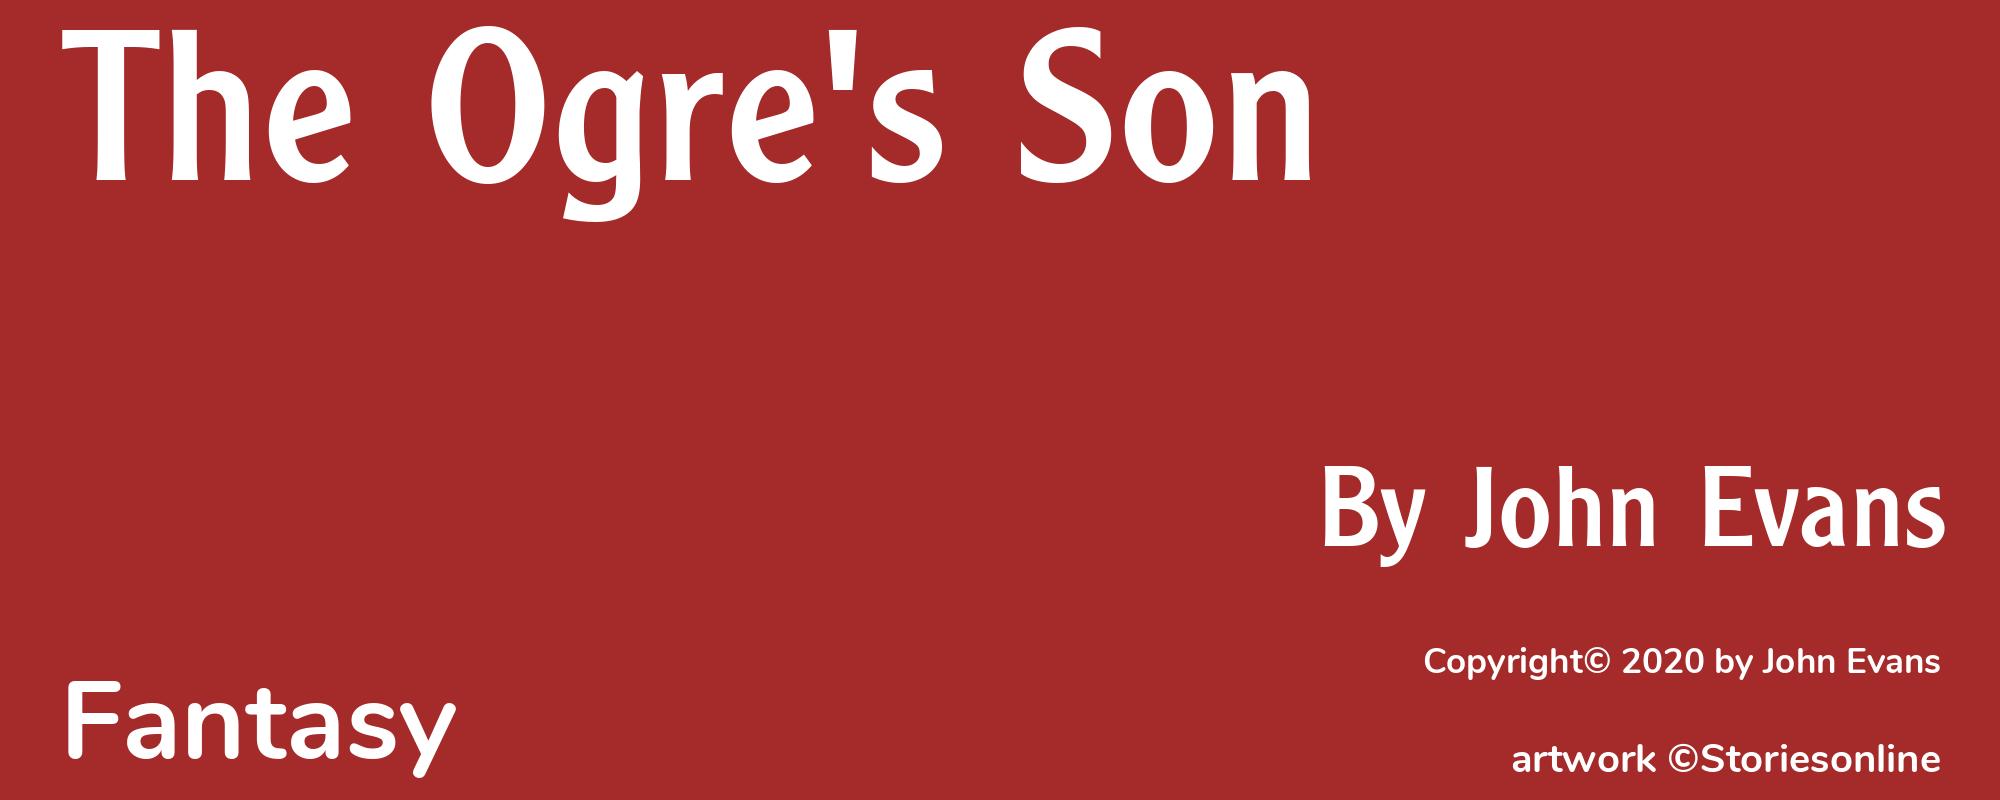 The Ogre's Son - Cover